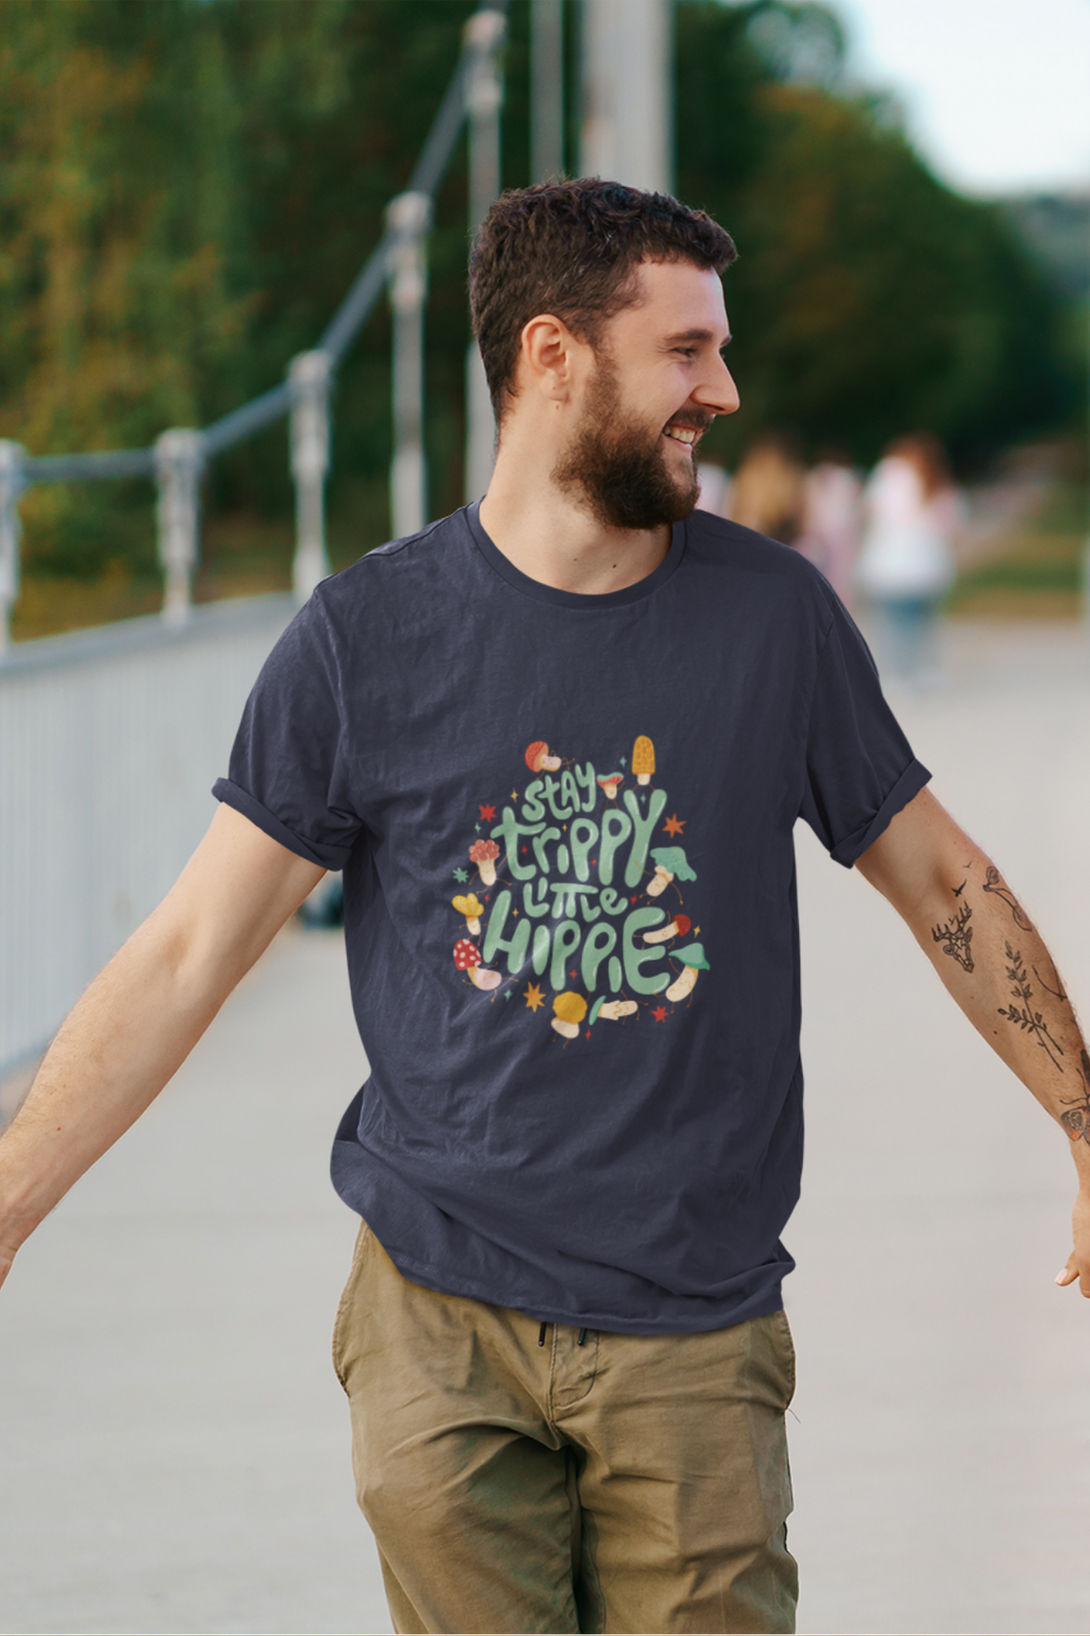 Stay Trippy Little Hippie Printed T-Shirt For Men - WowWaves - 7